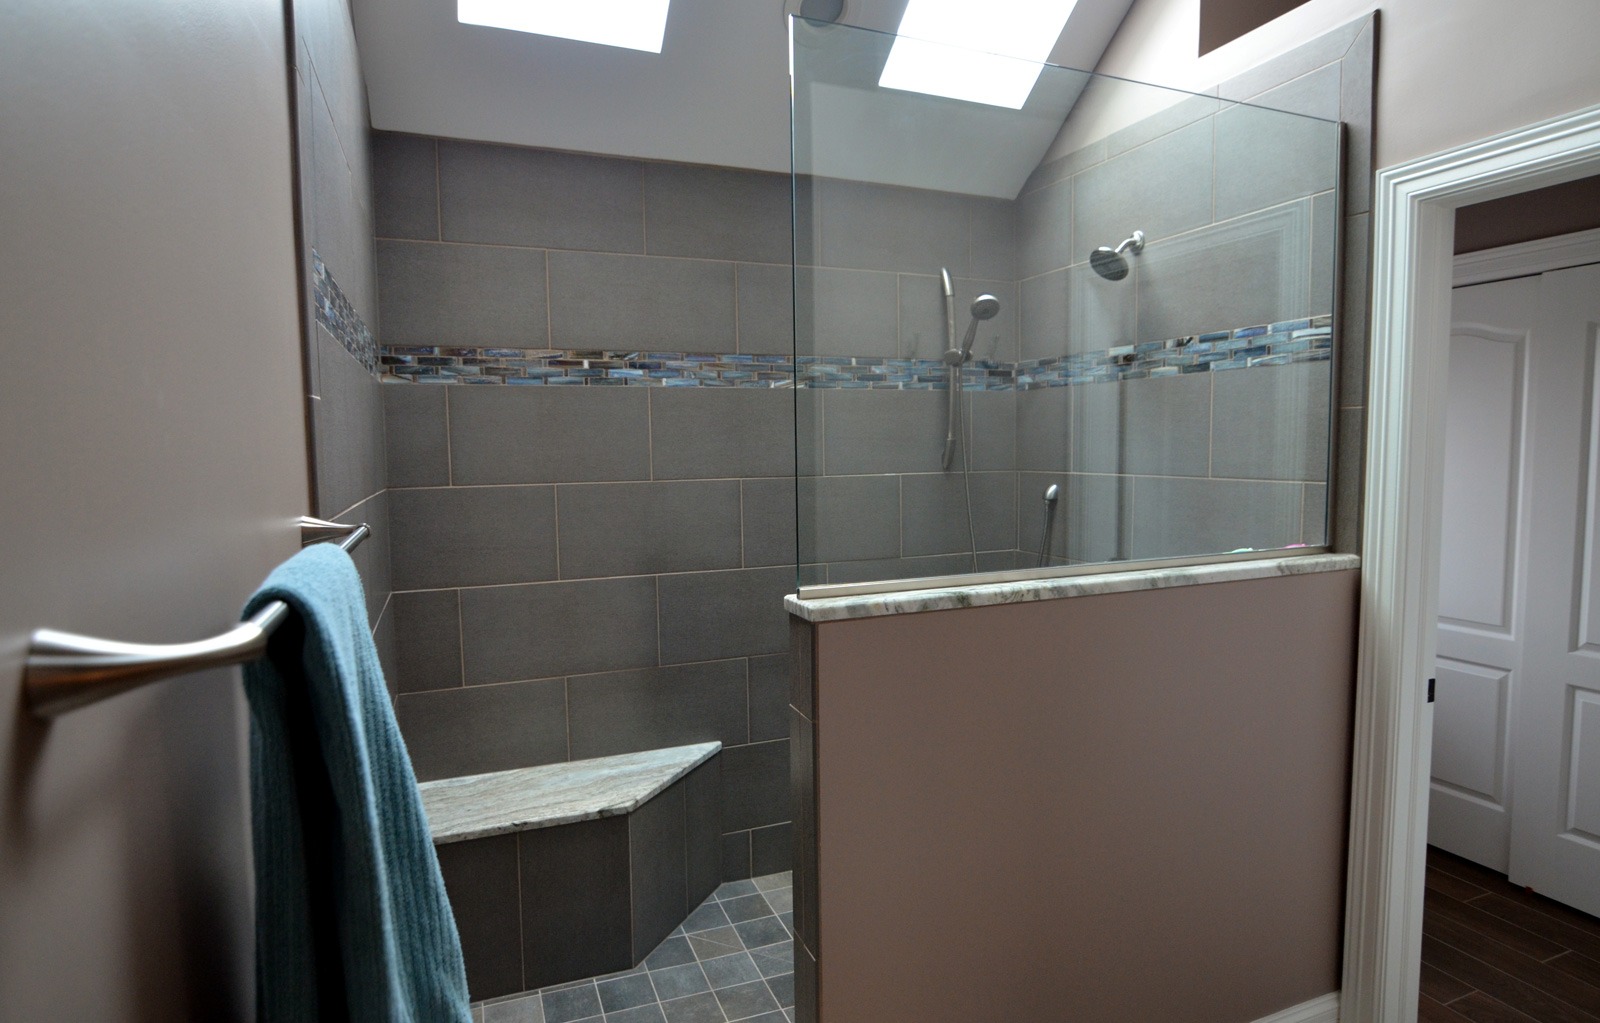 Bathroom remodeling in Naperville, IL. A custom walk-in shower replacing tub space.